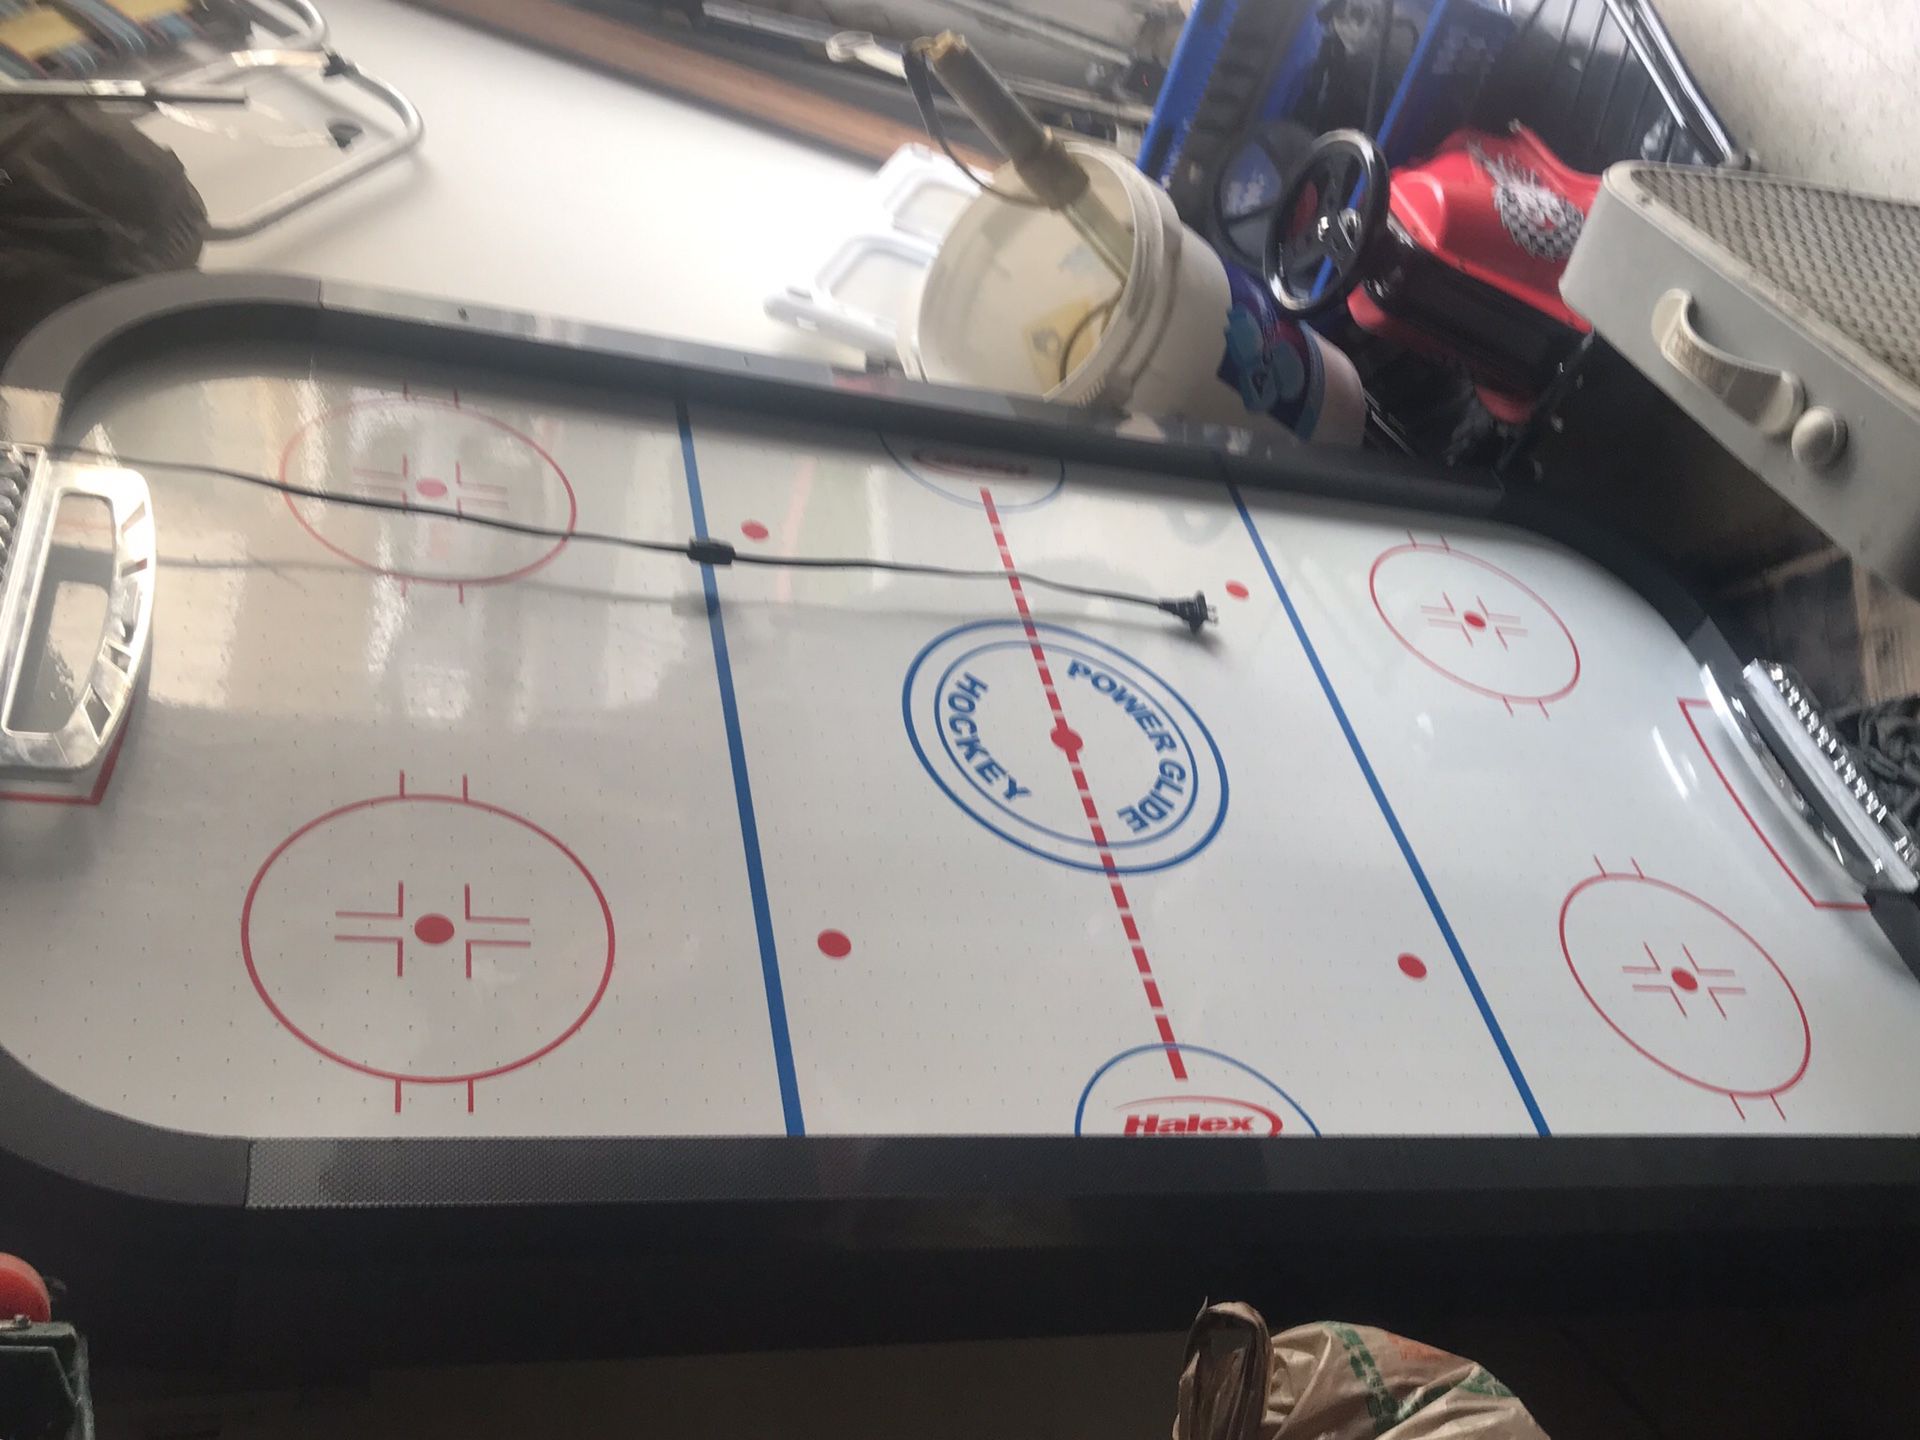 AIR HOCKEY TABLE 5-1/2 FOOT LONG X 36 INCHES WIDE X 32” INCHES TALL. COMES WITH 2 HANDLES AND 1 PUCK